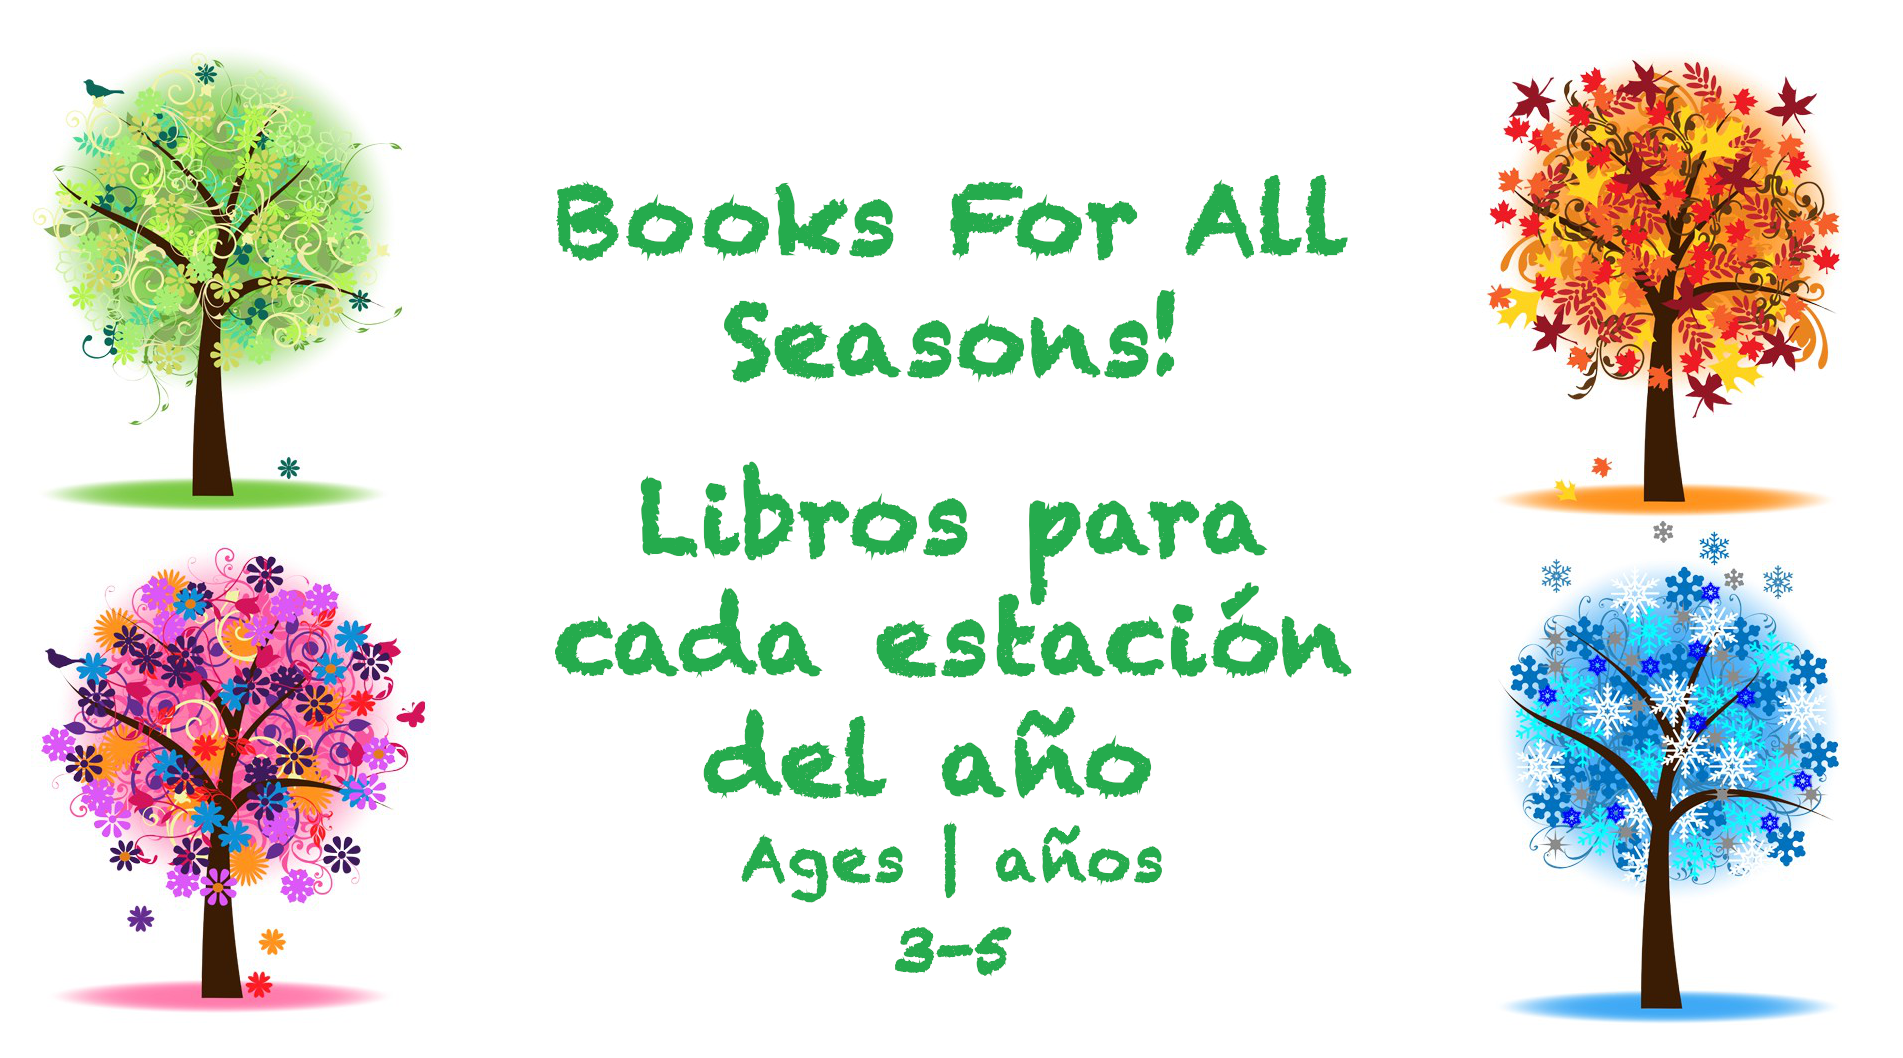 Books for All Seasons for 3-5 year olds